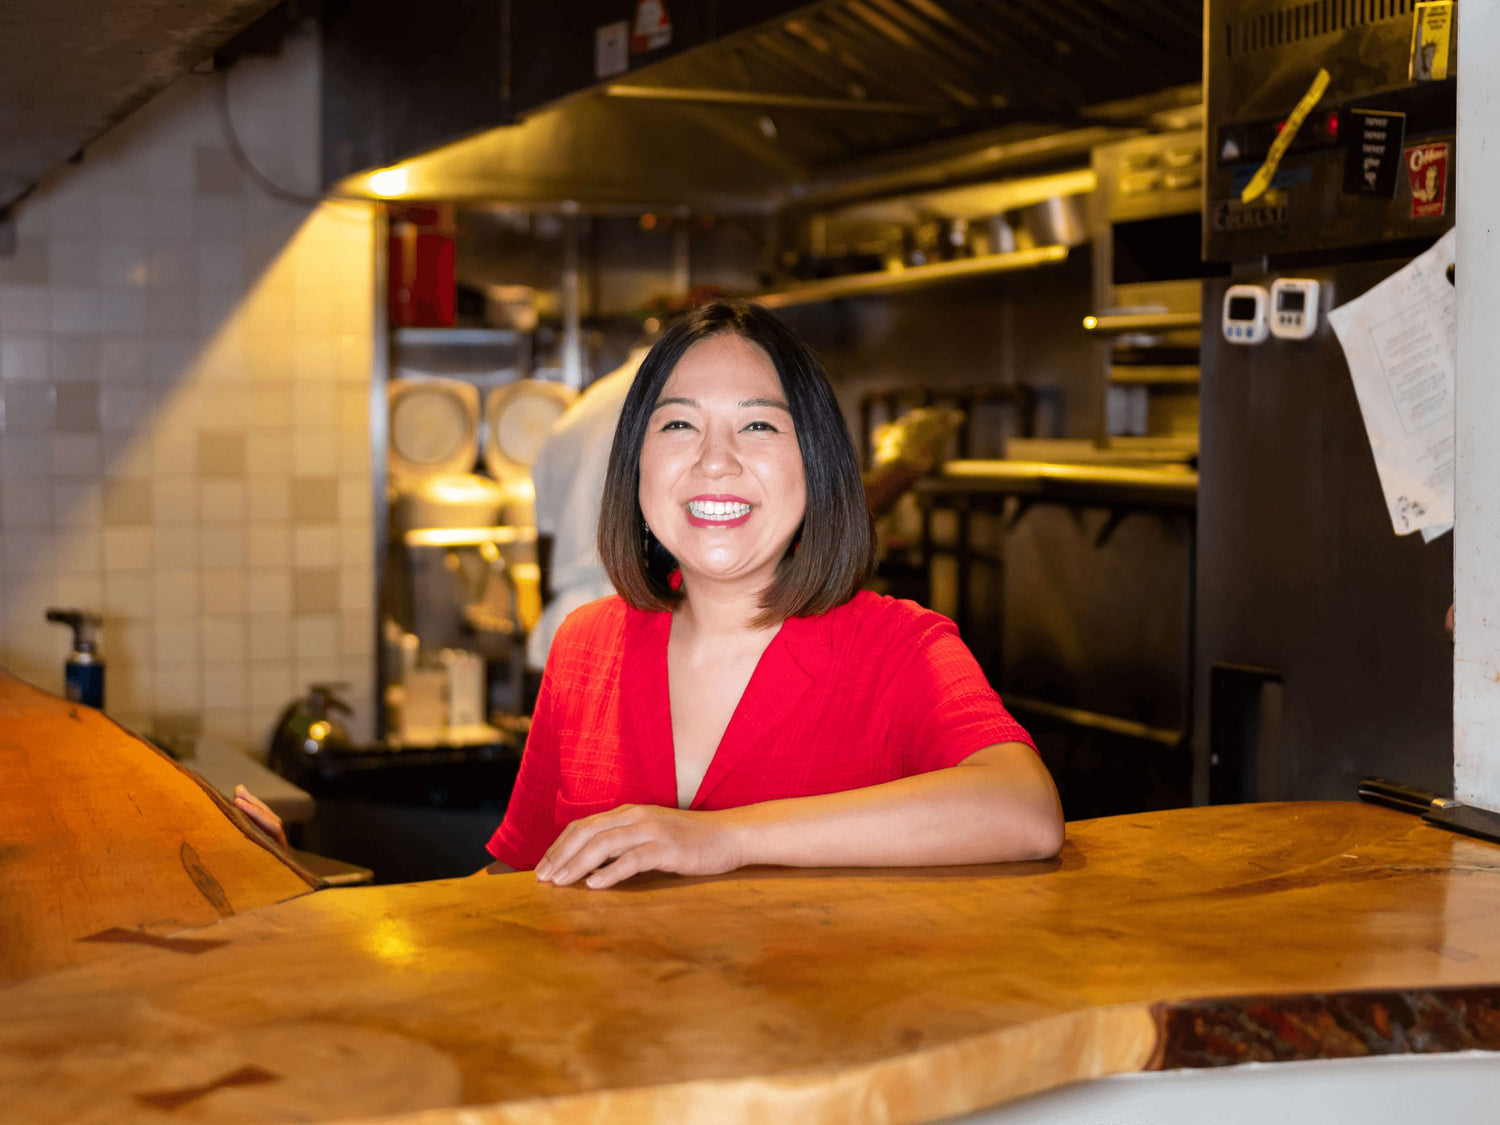 A smiling woman stands in a restaurant kitchen.